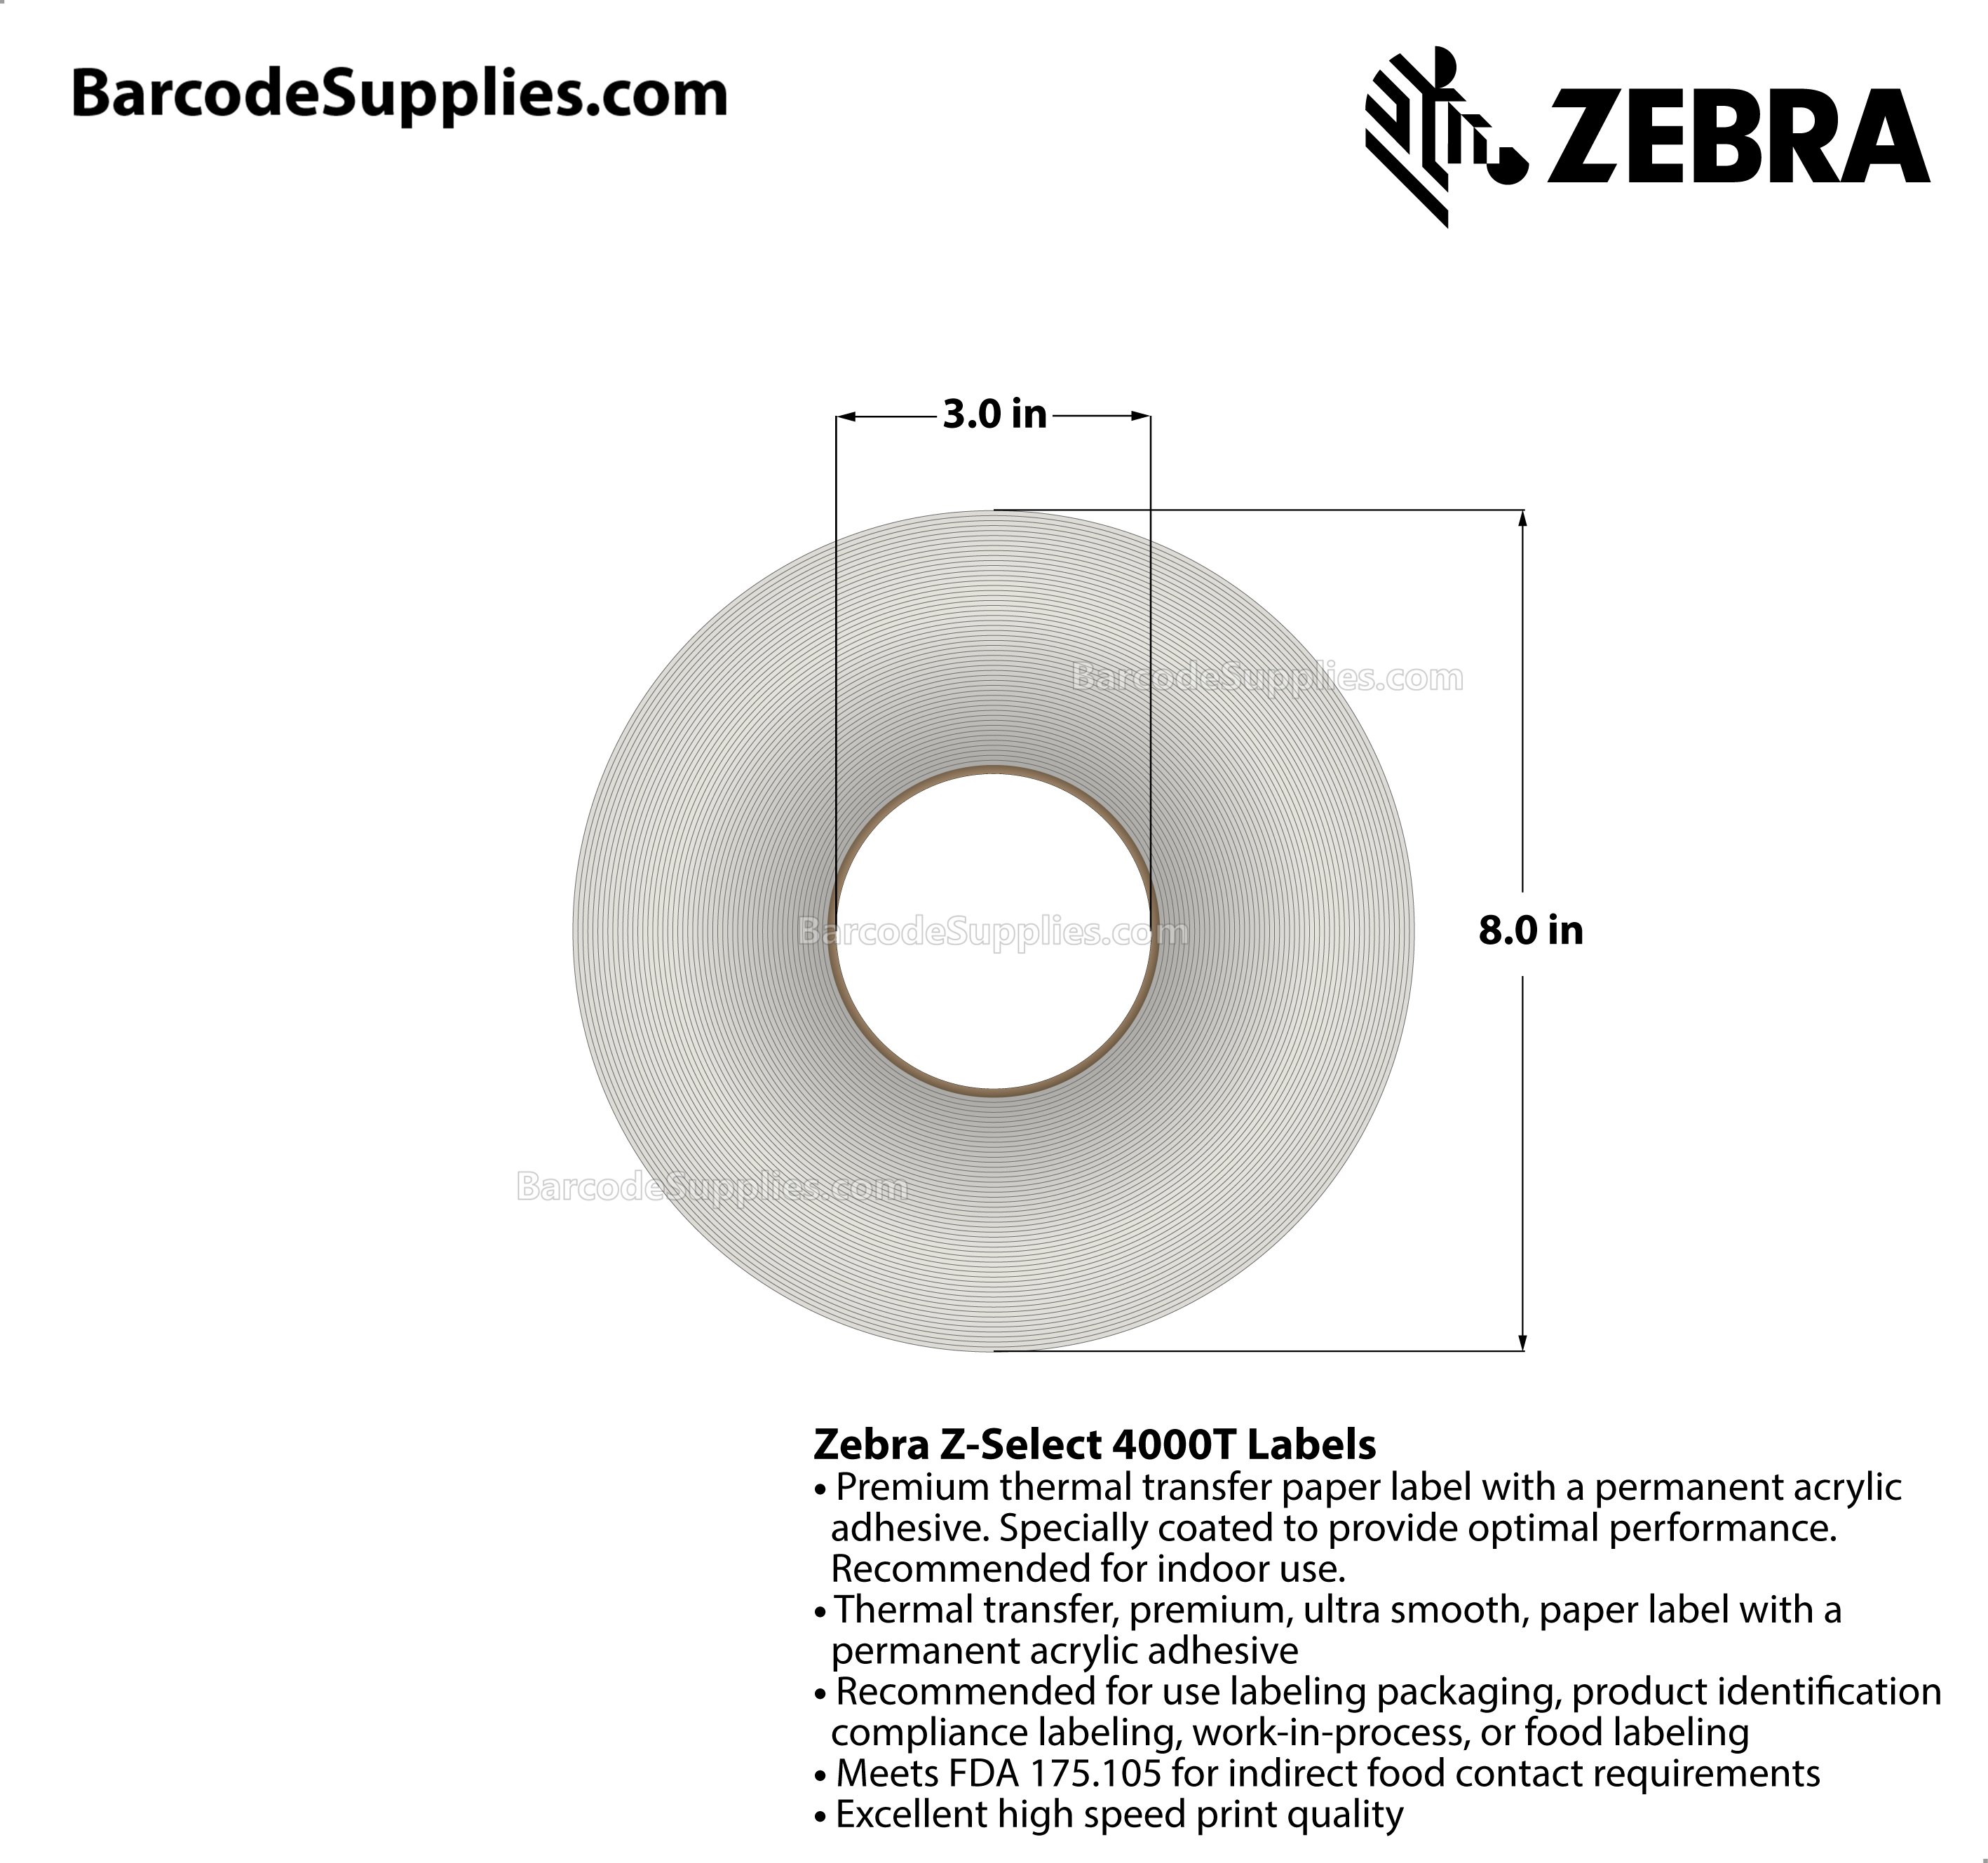 Products 4 x 3 Thermal Transfer White Z-Select 4000T Labels With Permanent Adhesive - Not Perforated - 1870 Labels Per Roll - Carton Of 4 Rolls - 7480 Labels Total - MPN: 72291